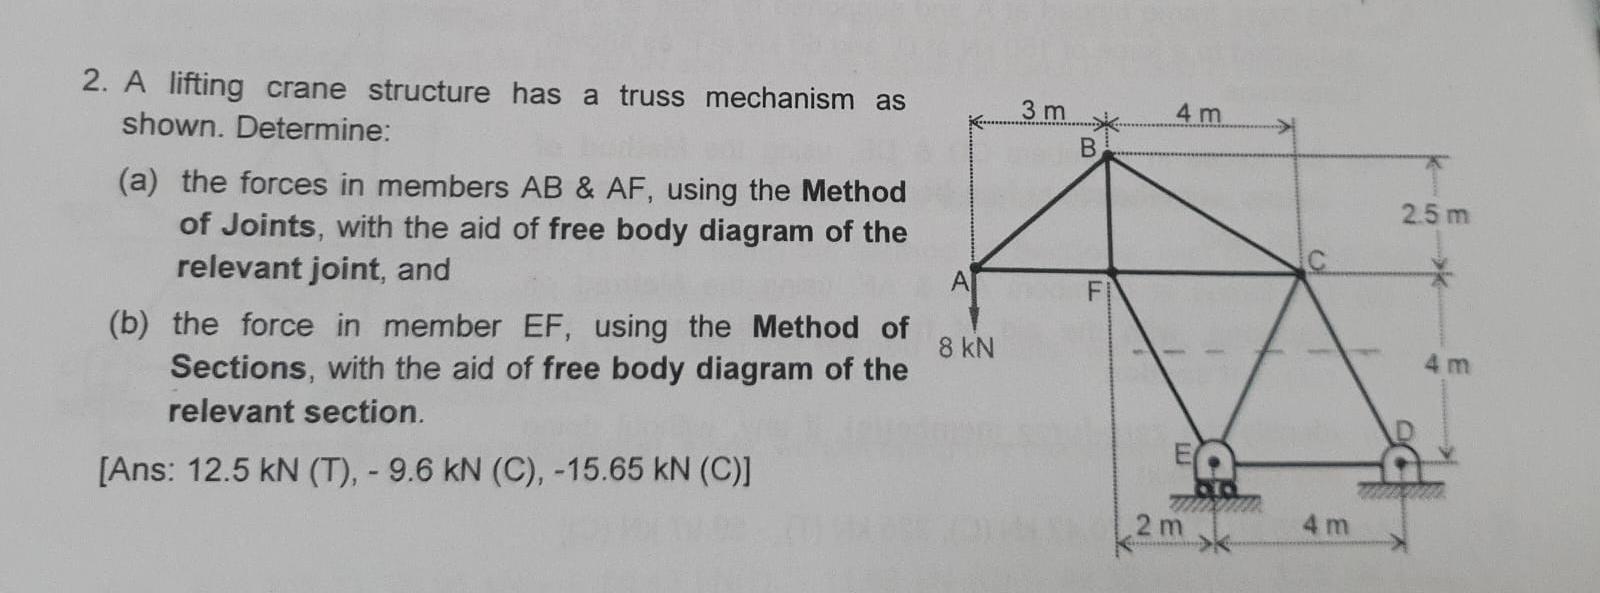 2. A lifting crane structure has a truss mechanism as shown. Determine: (a) the forces in members ( A B ) & AF, using the